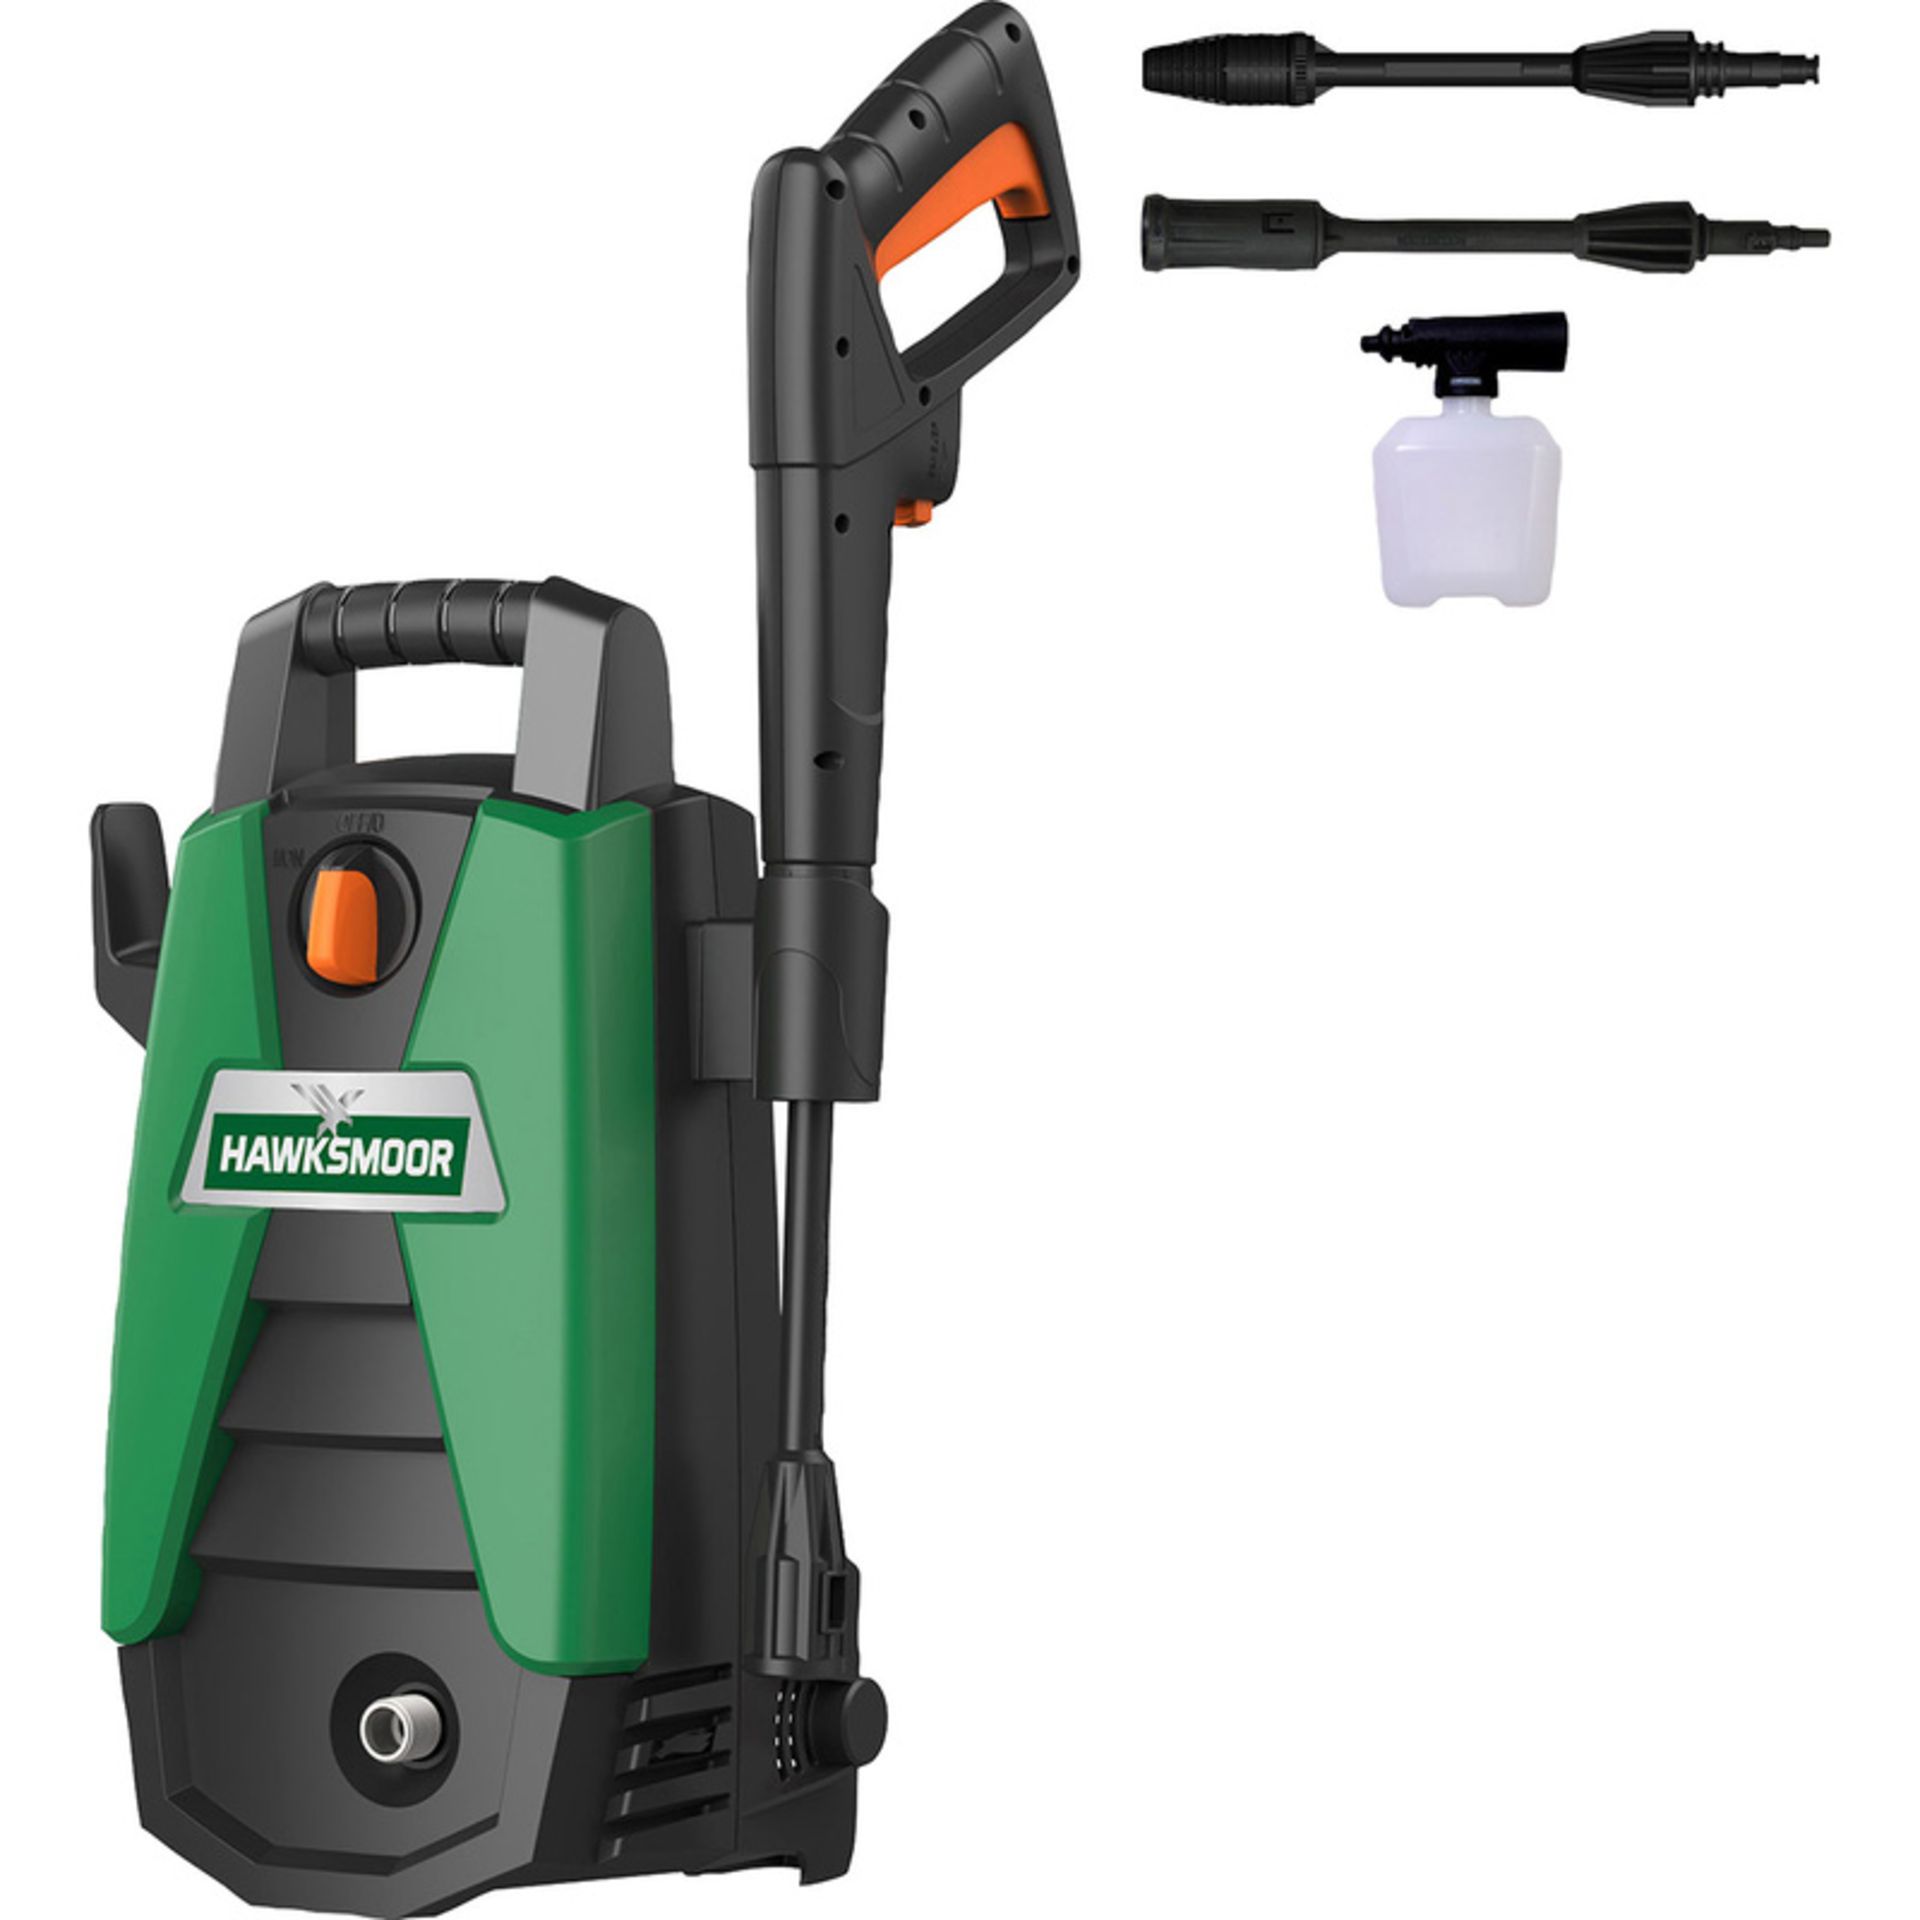 Hawksmoor High Pressure Washer 108bar. -ER32. Compact design with space-saving integrated